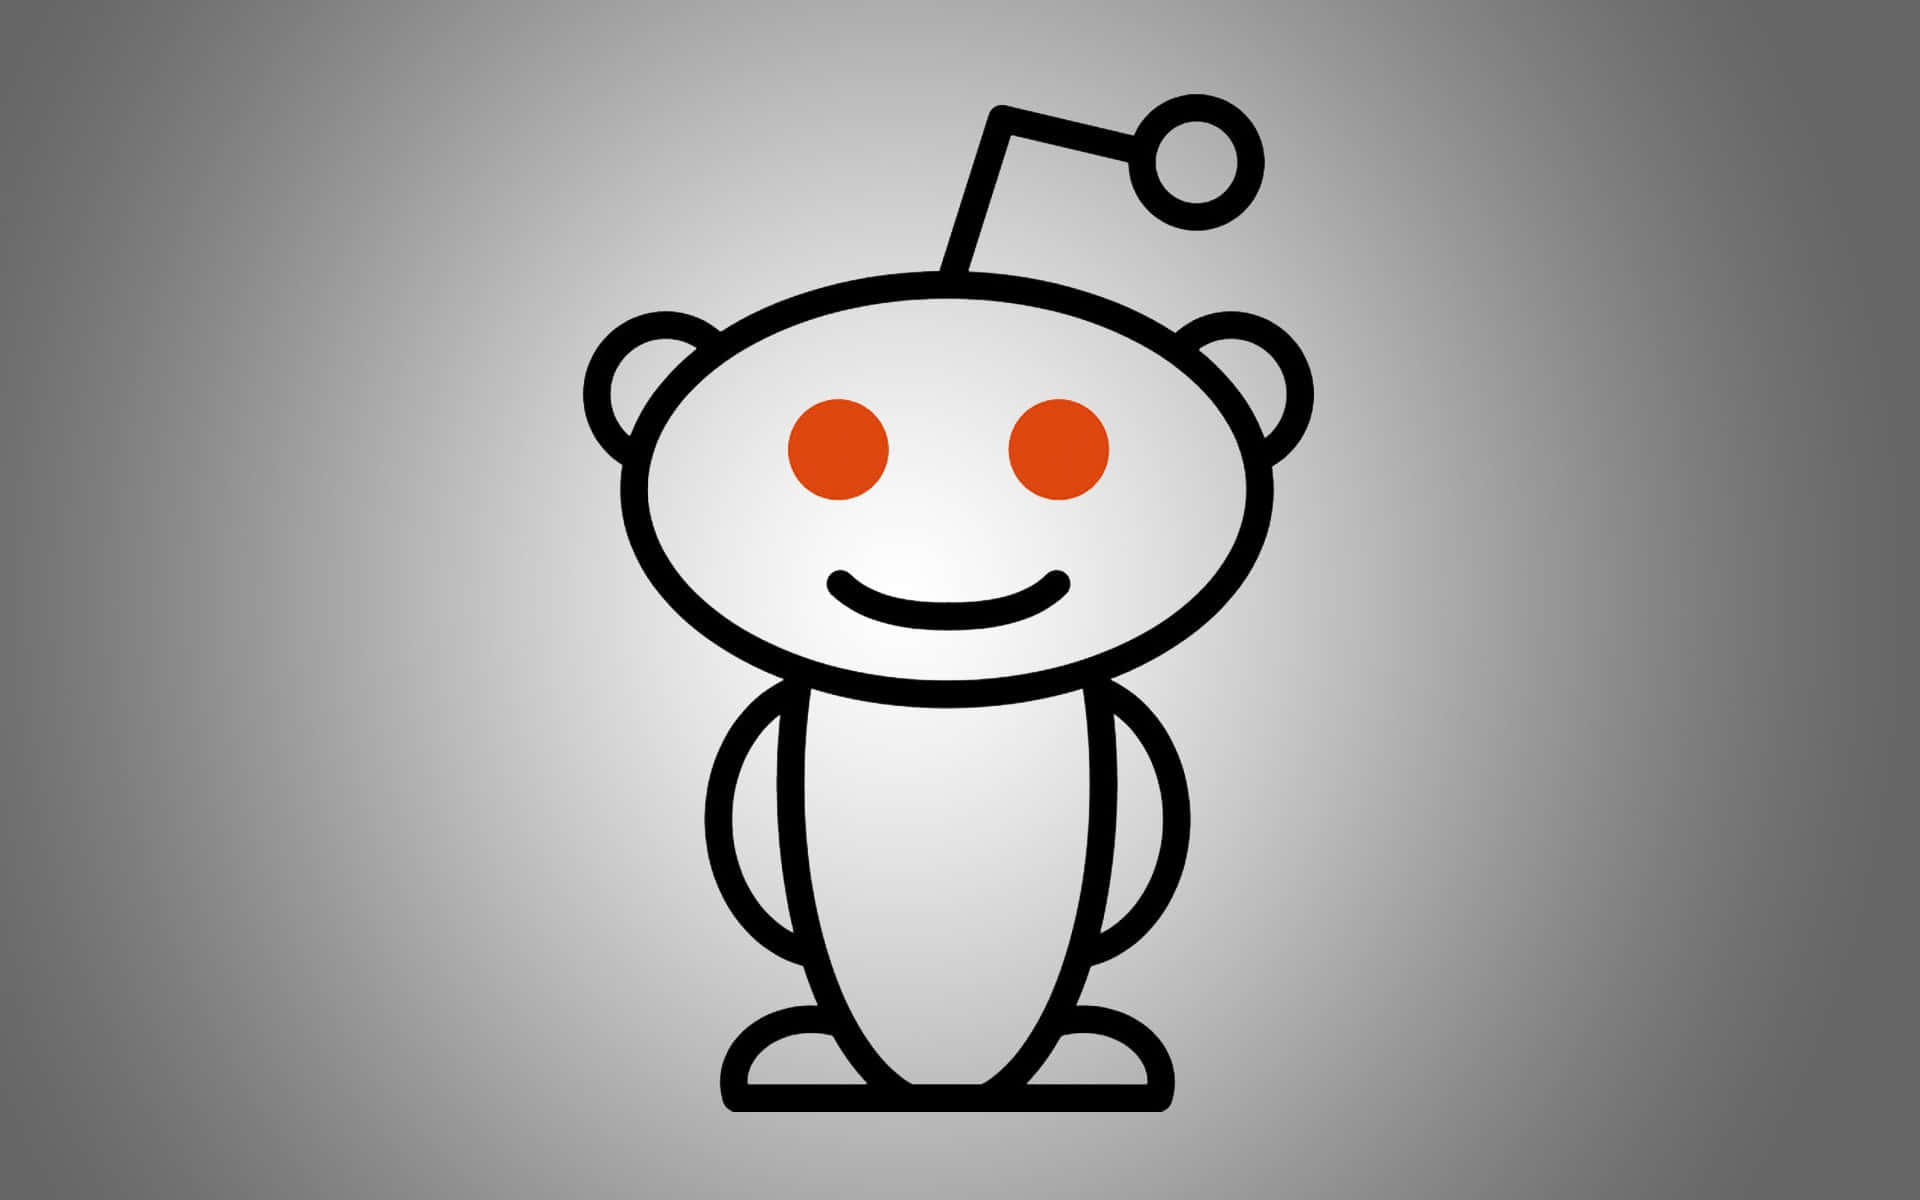 Discover the Best Content on Reddit